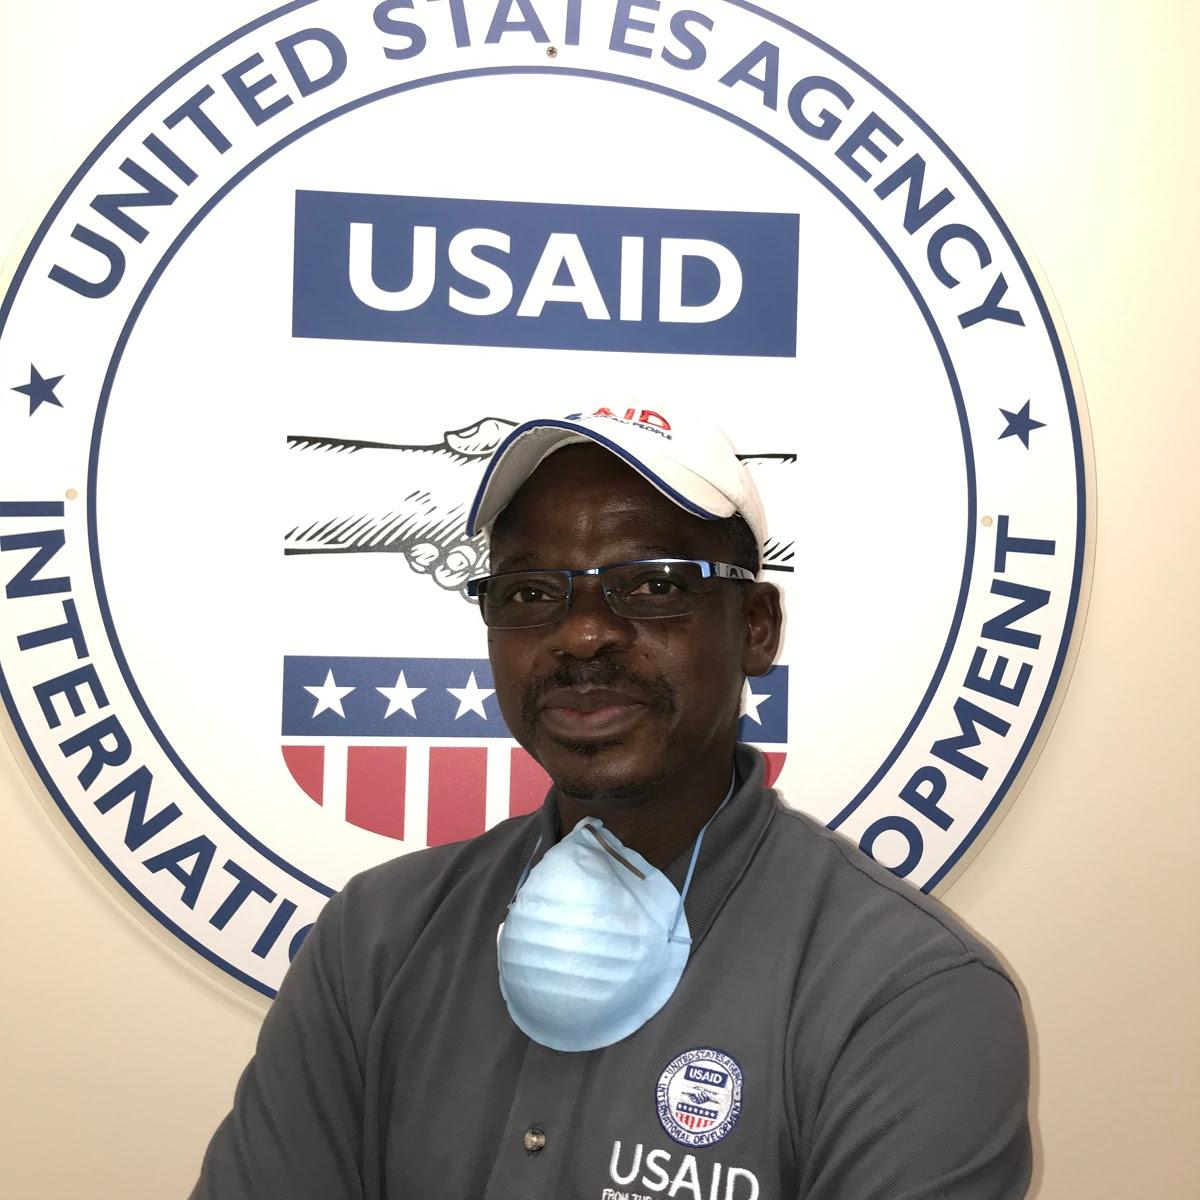  Yao Kouassi, a driver at the United States Agency for International Development's (USAID) Côte d’Ivoire office